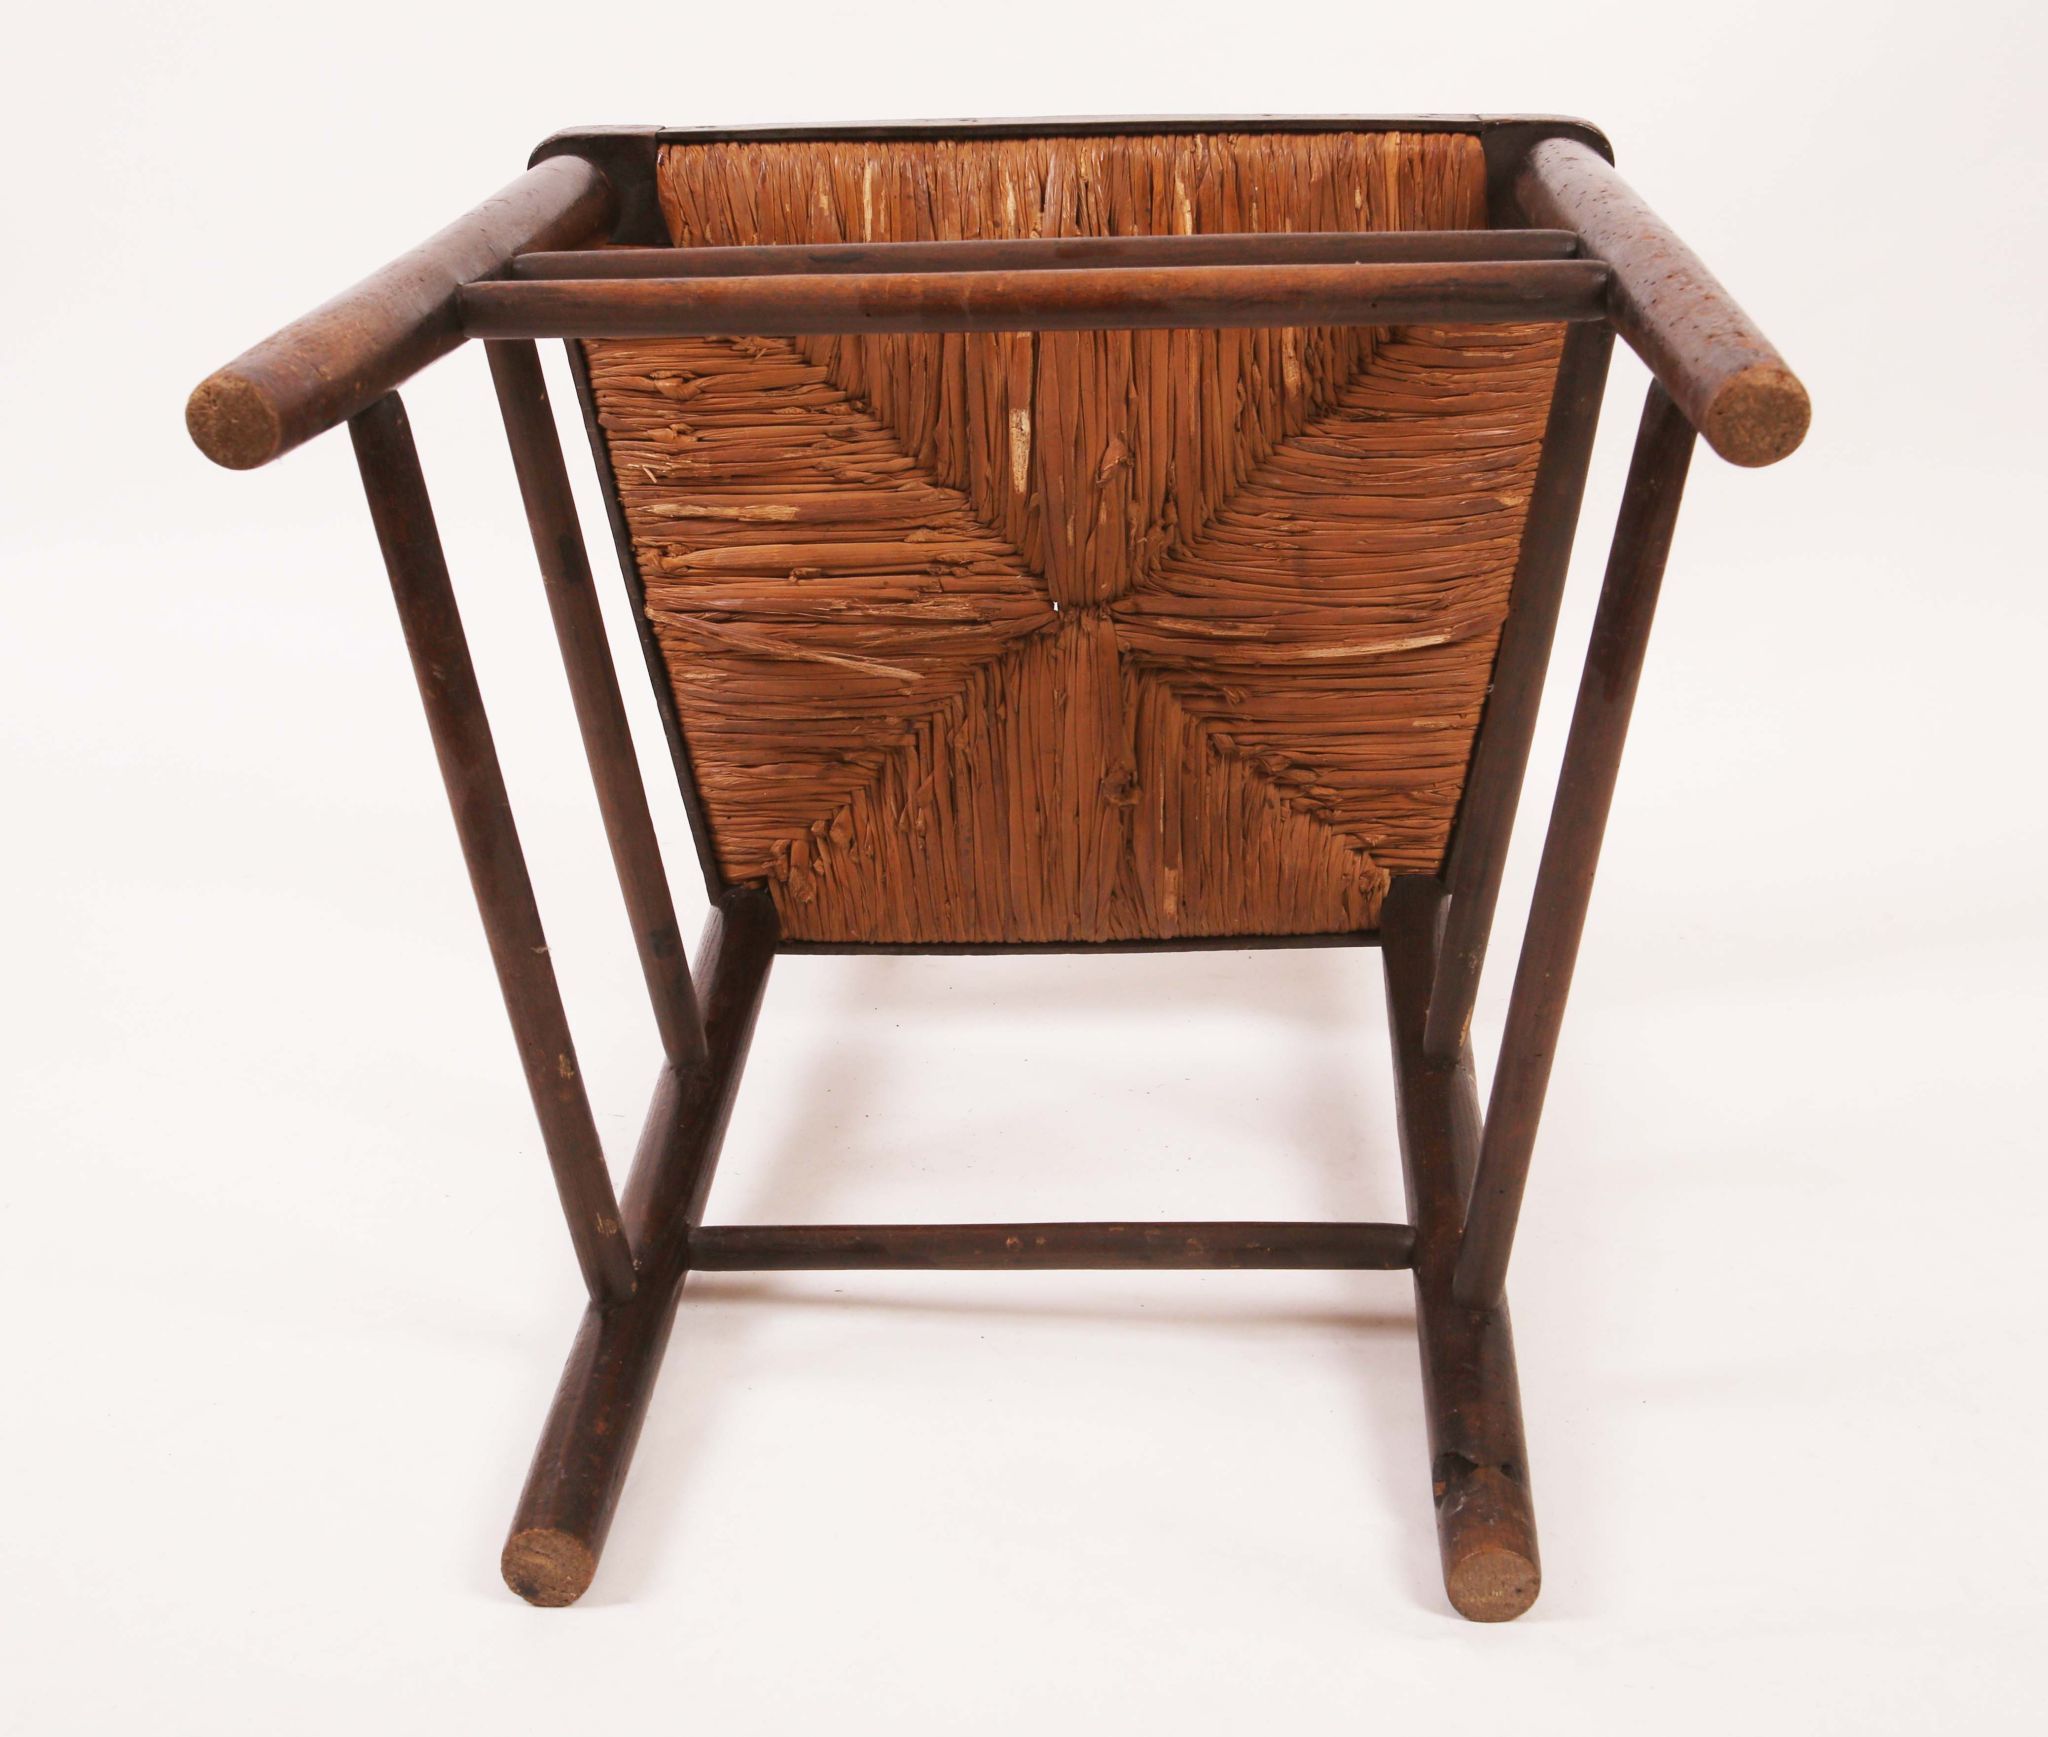 Attributed to William Morris, a late 19th century `Sussex` chair, with rush seat. - Image 3 of 5